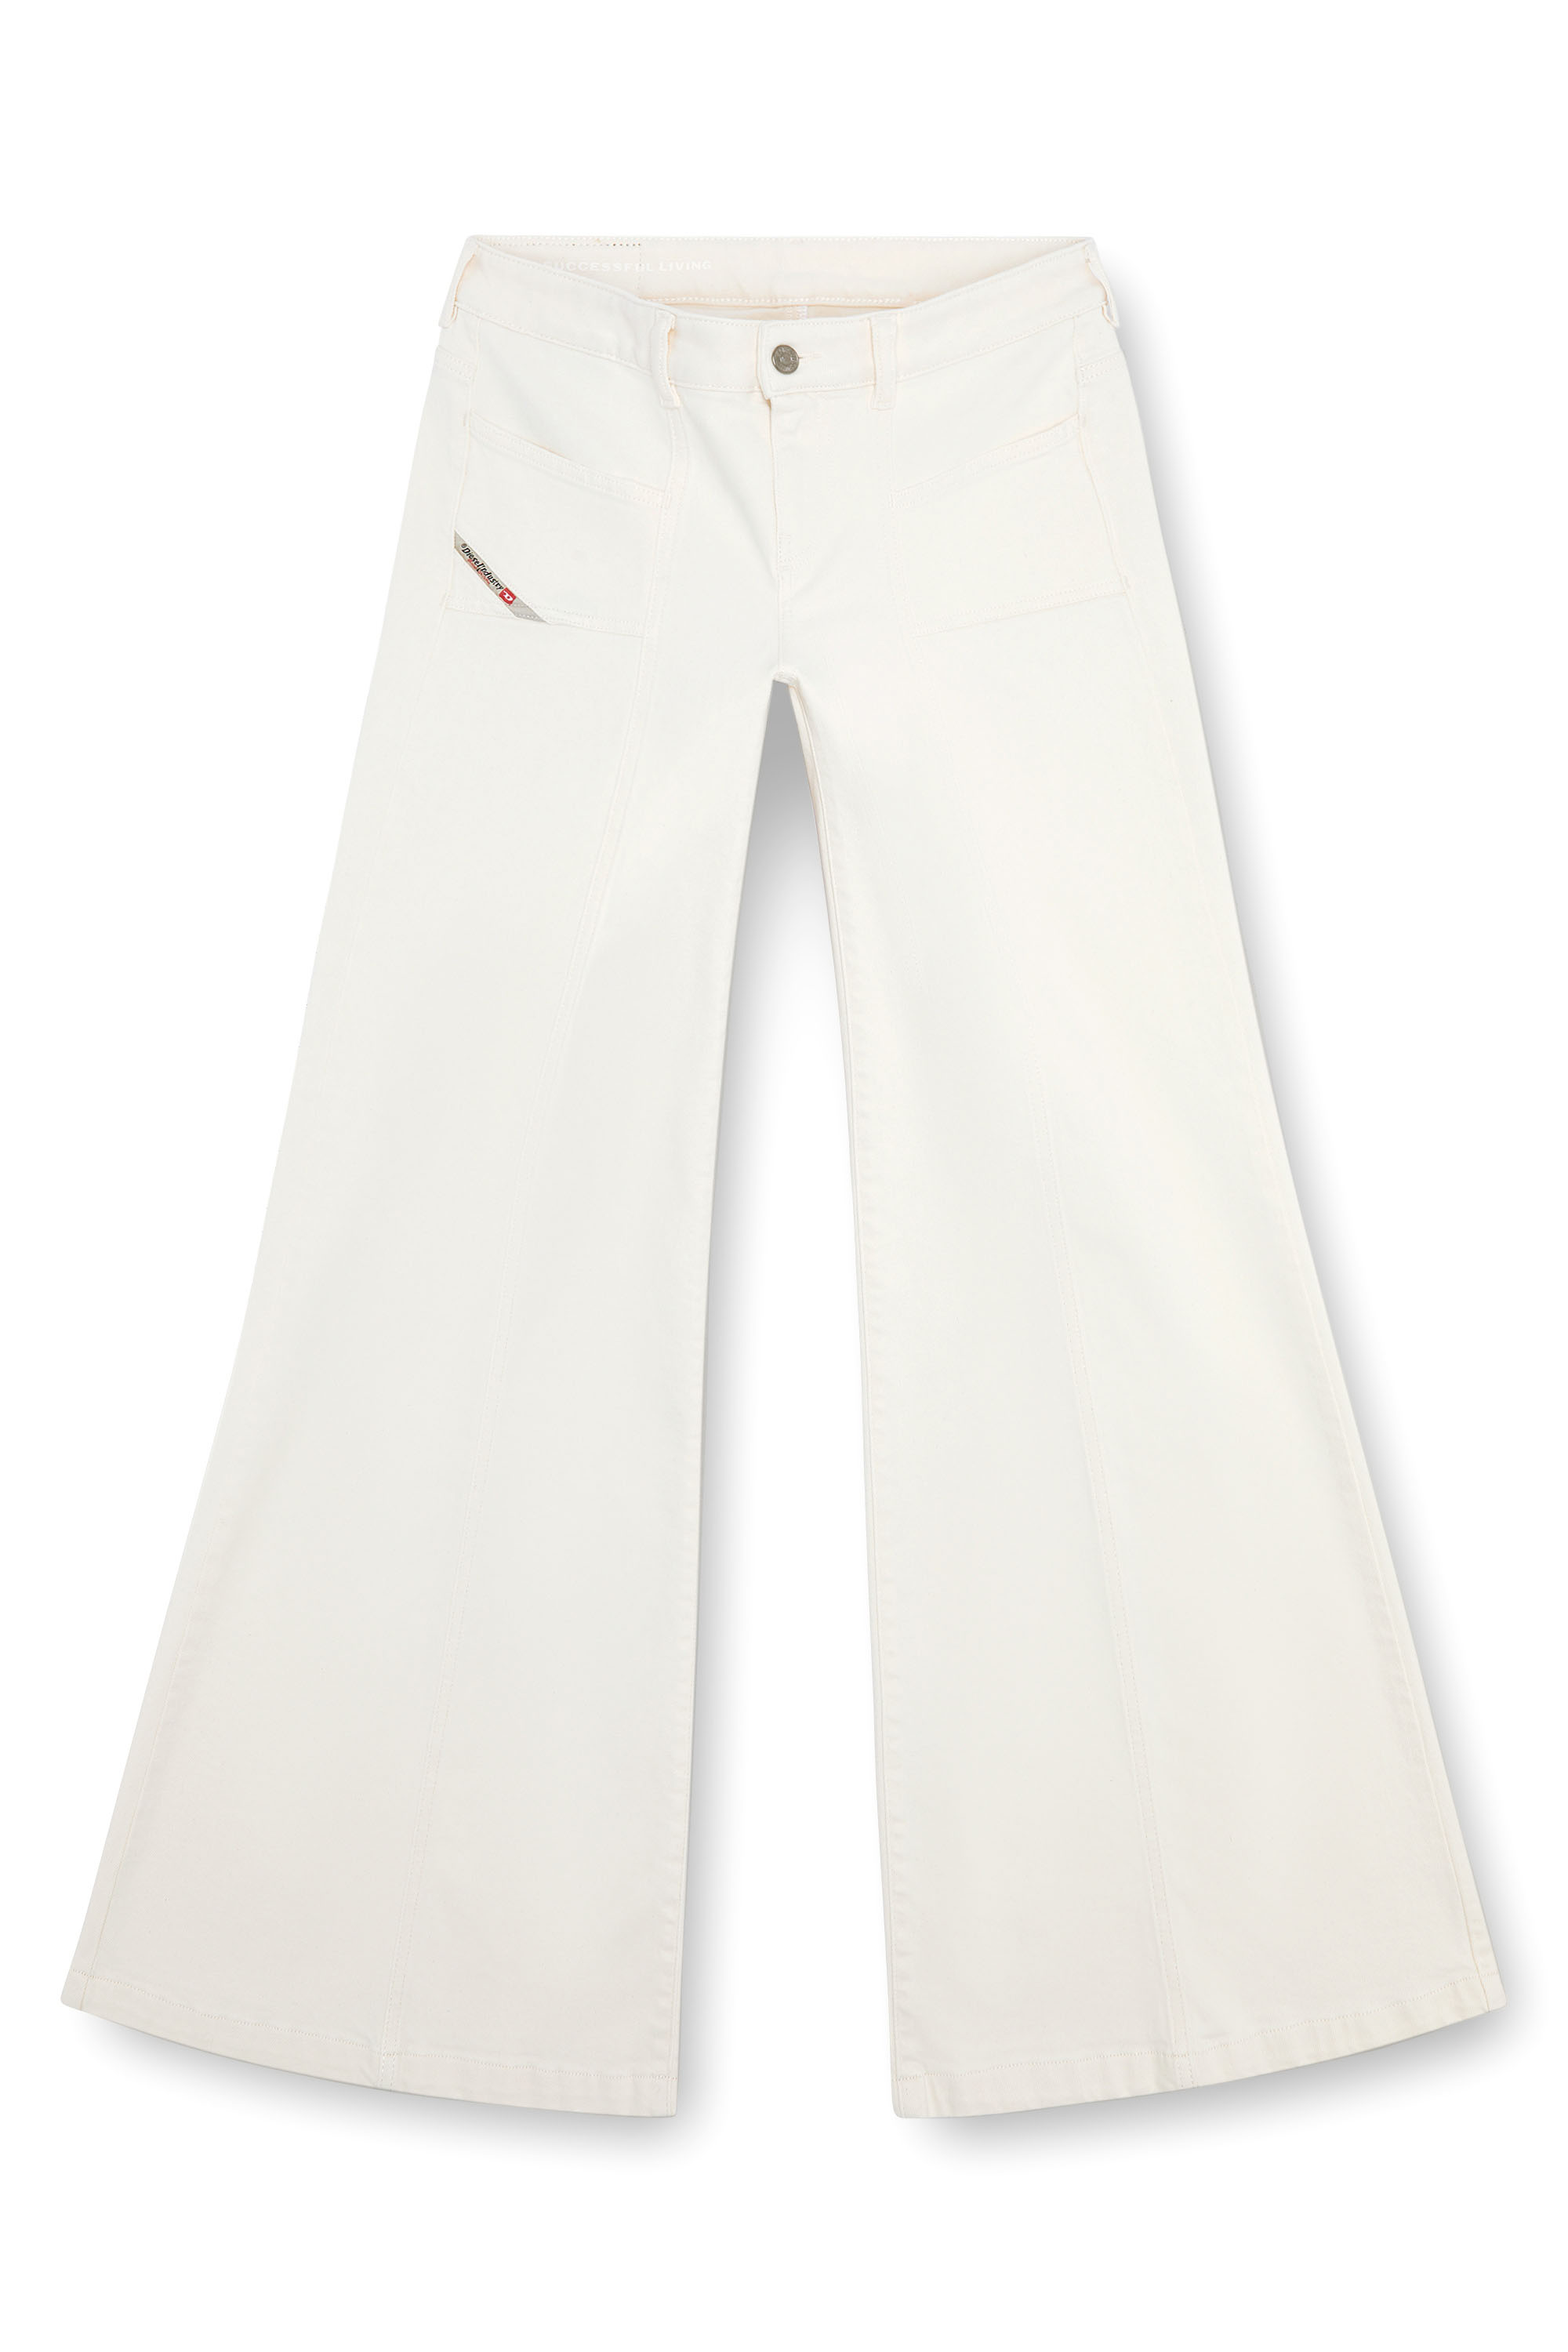 Diesel - Bootcut and Flare Jeans D-Akii 09J68, Mujer Bootcut y Flare Jeans - D-Akii in Blanco - Image 5